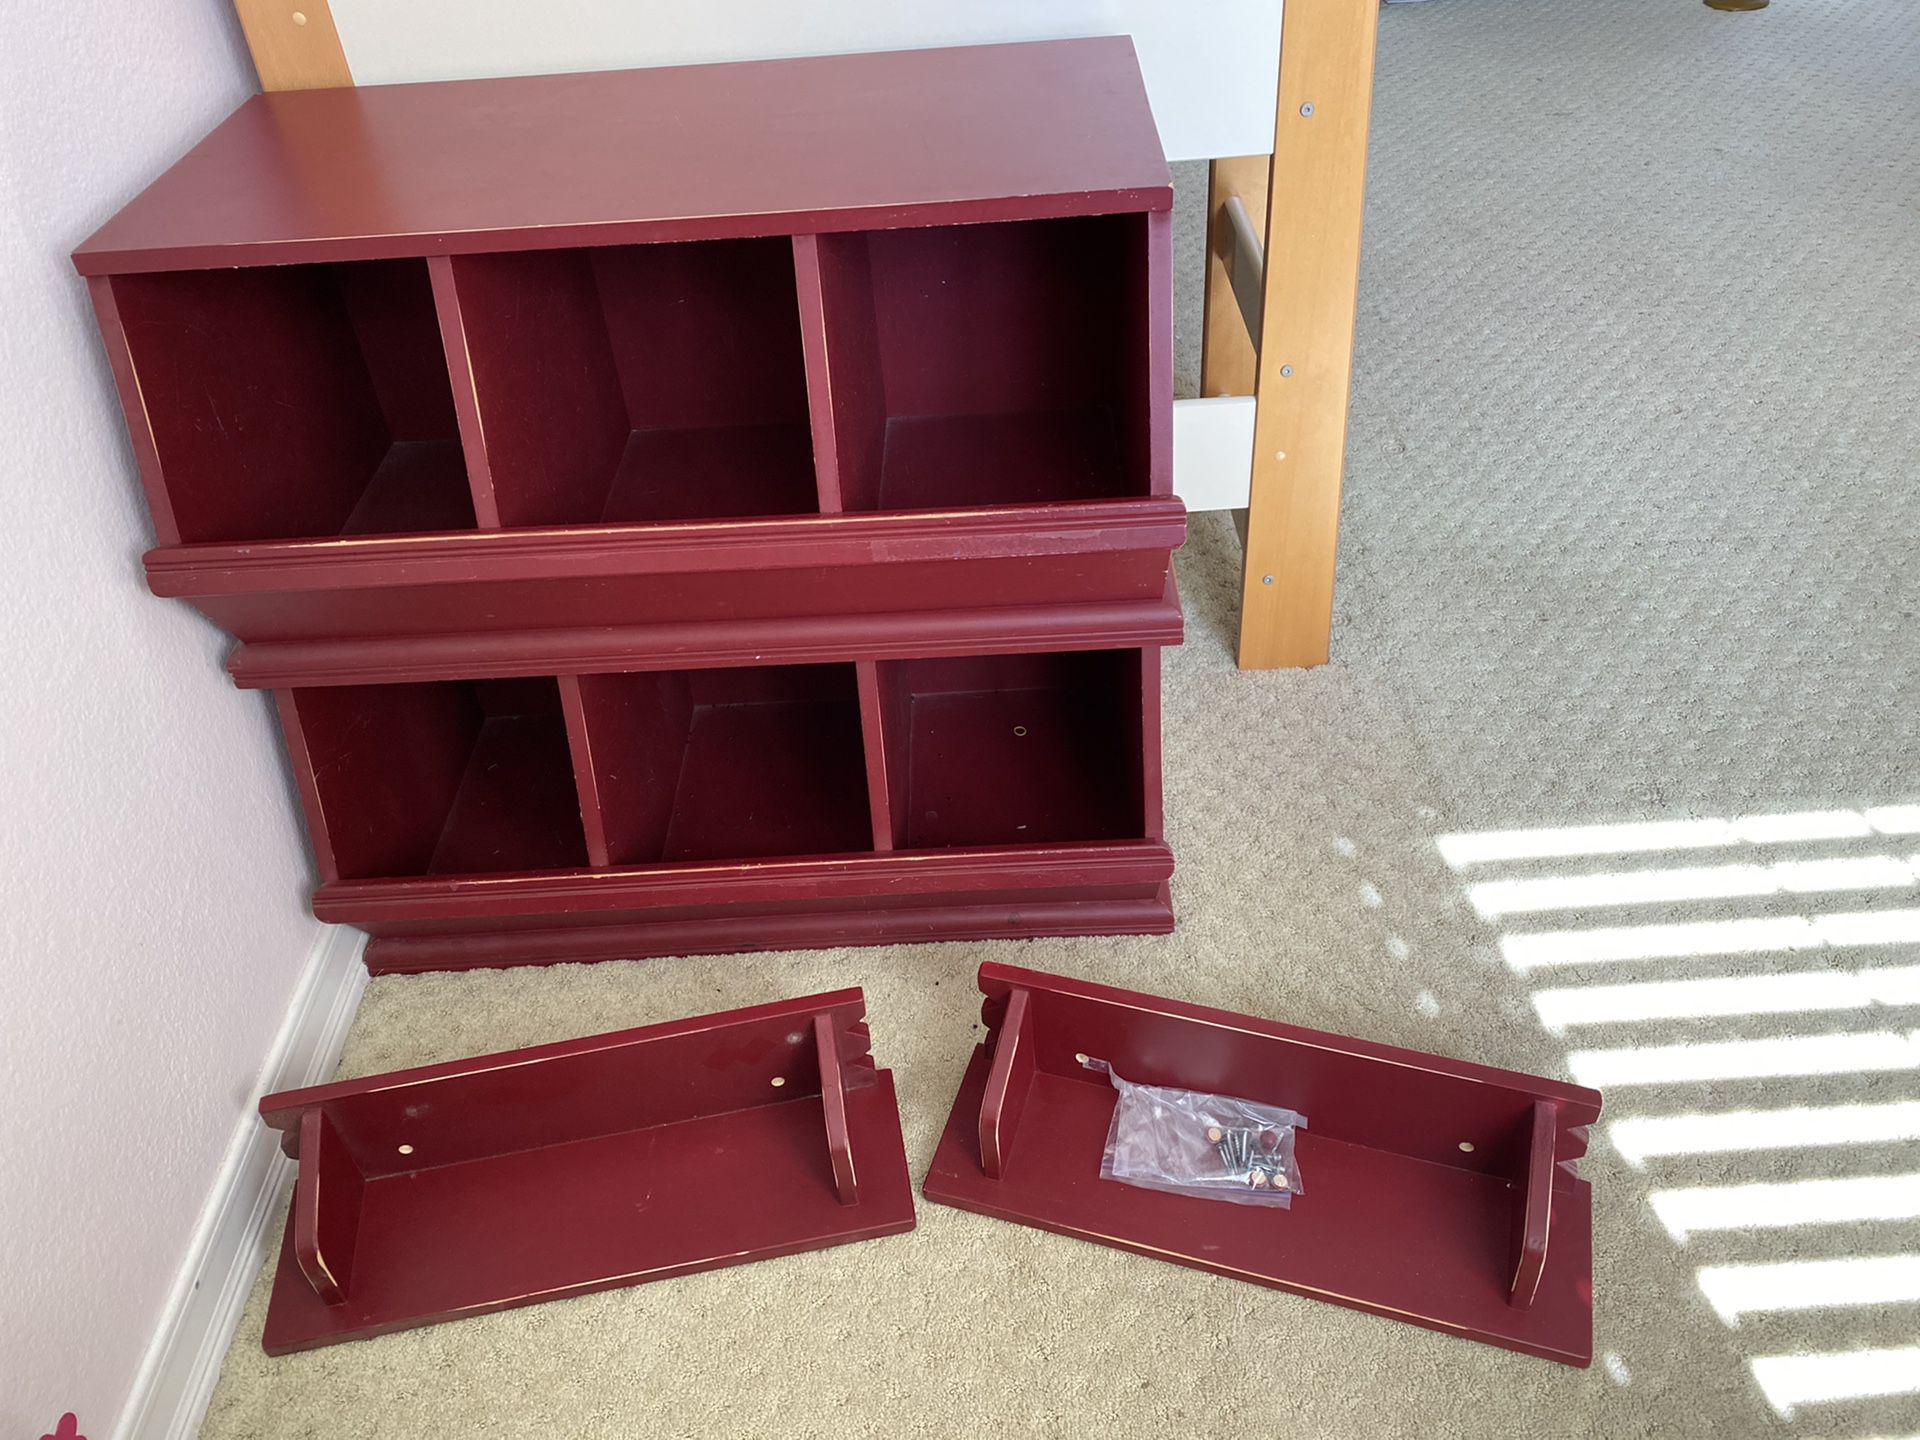 Red Pottery Barn Toy Storage Bins and Wall Shelves